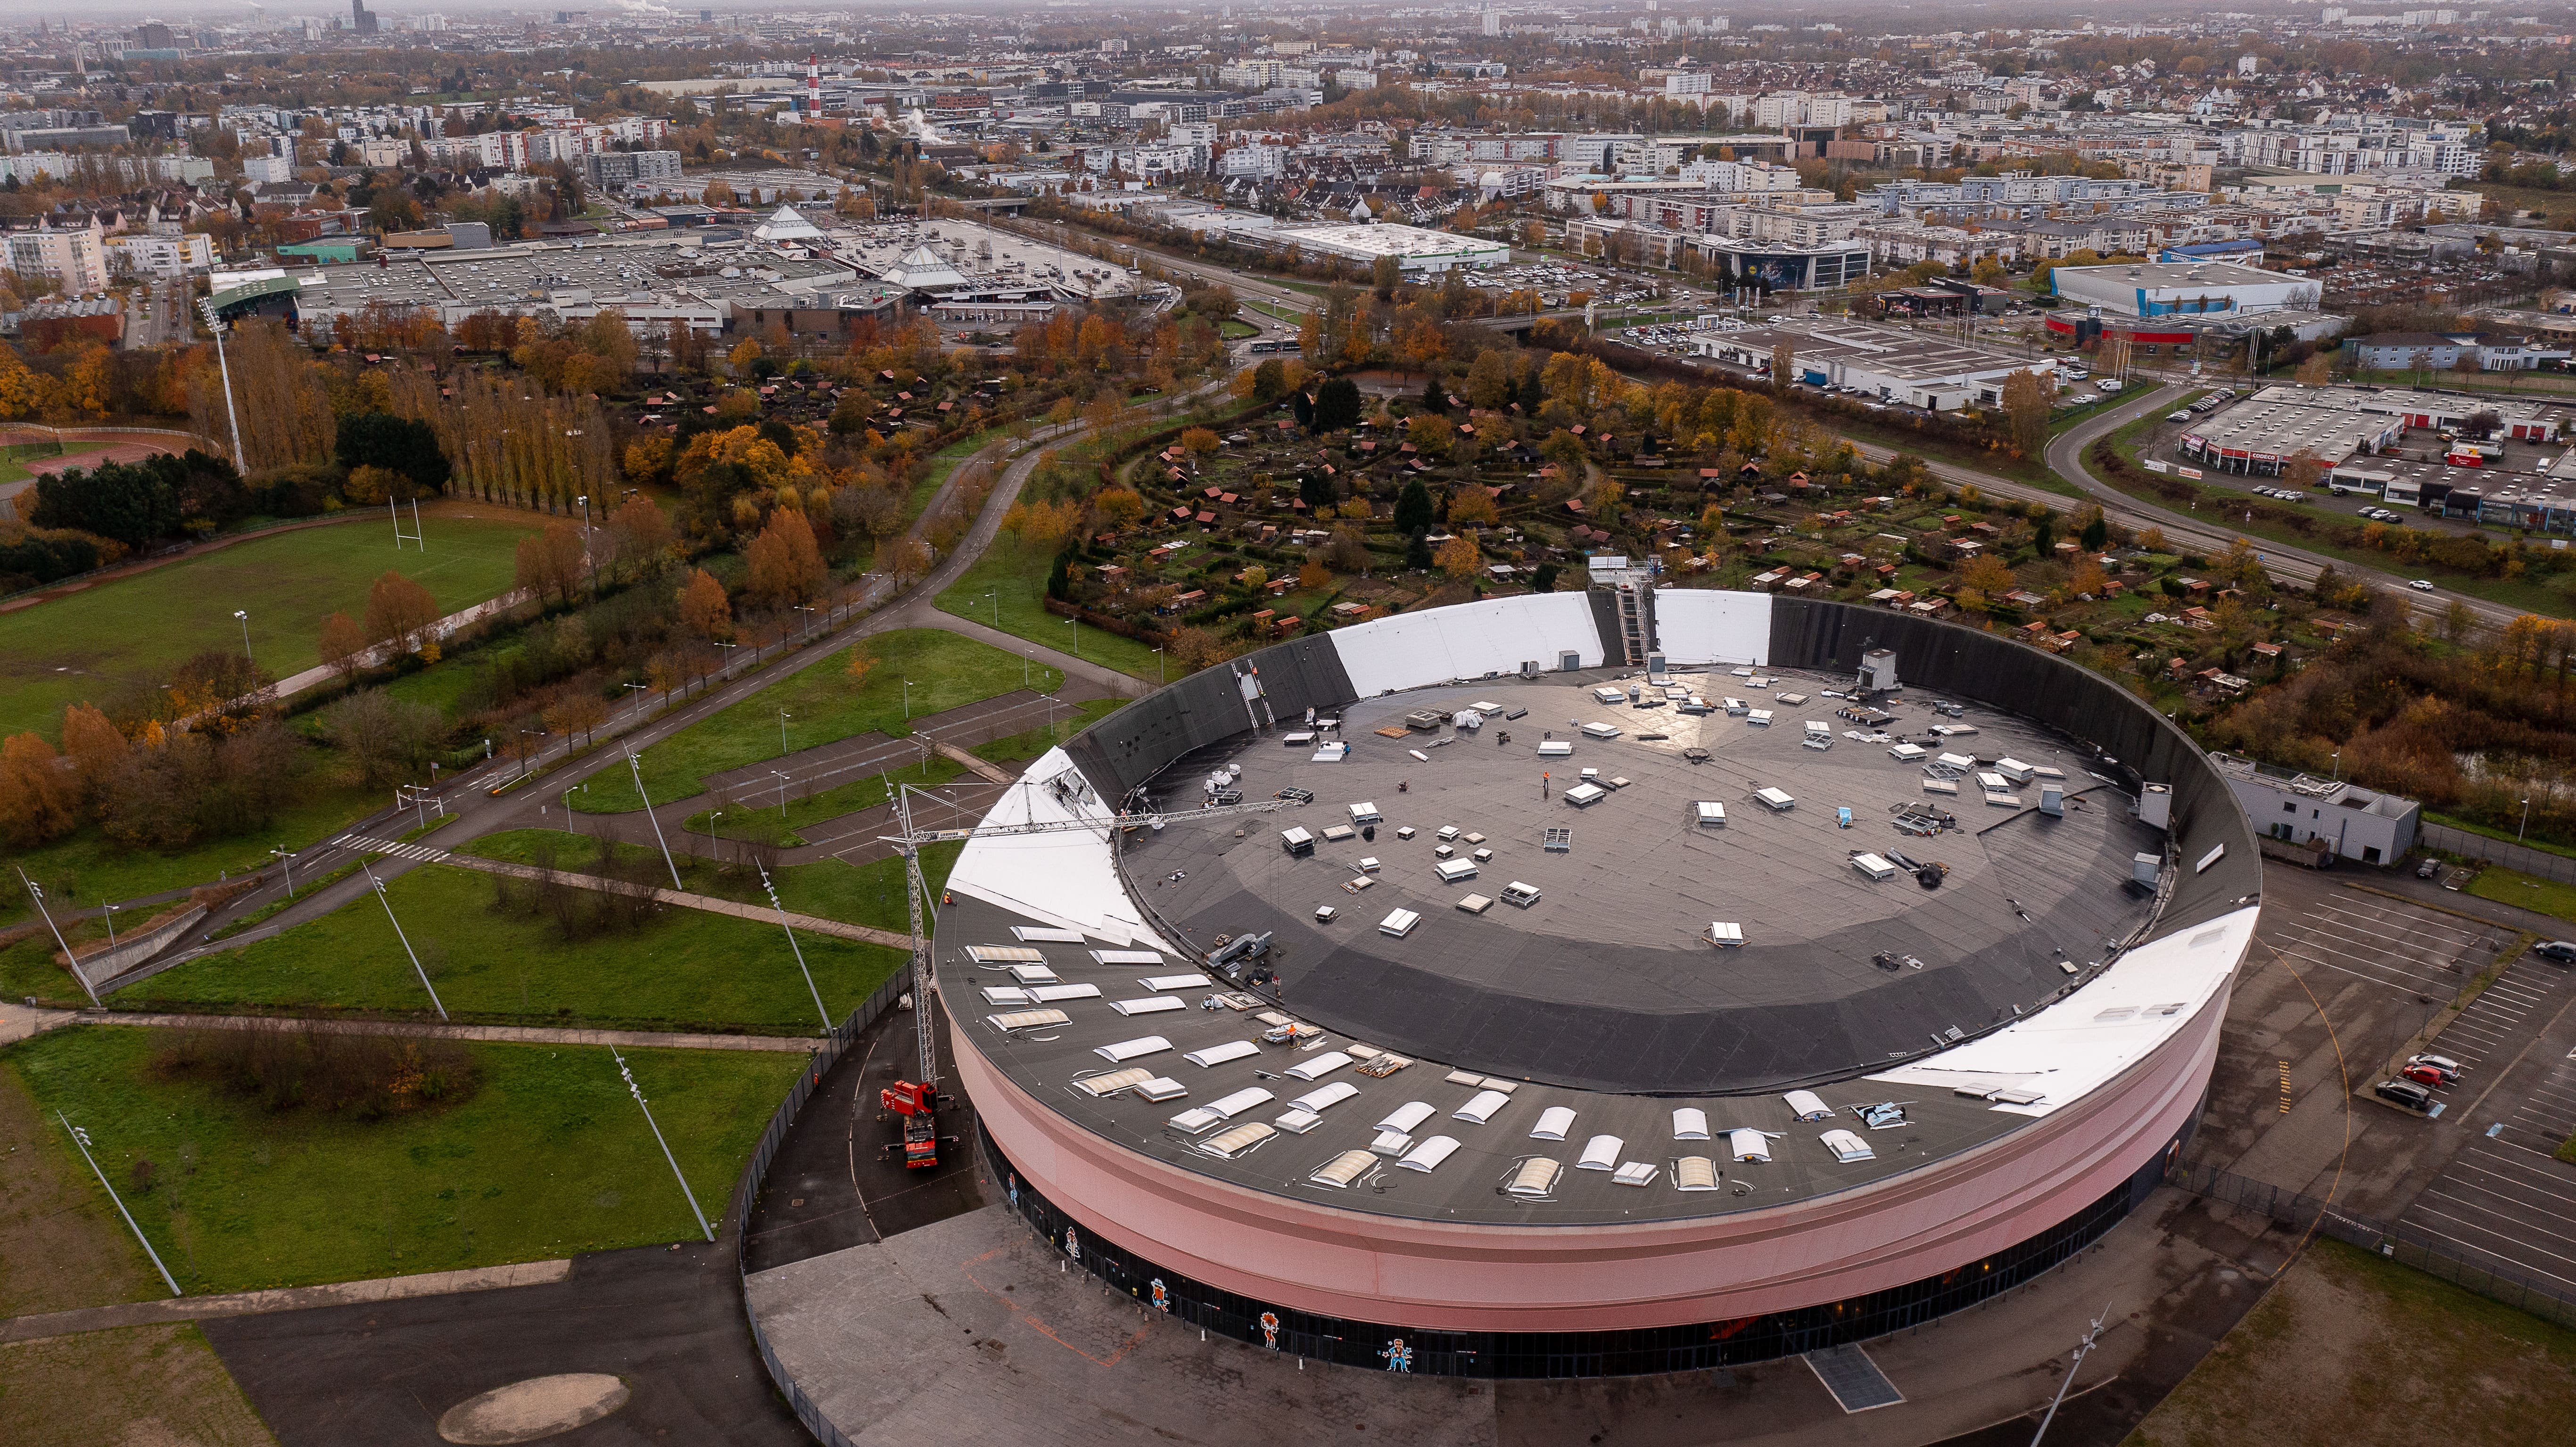 Roof of the Zenith in Strasbourg in France waterproofed with the Elevate RubberGard EPDM and the UltraPly TPO membranes